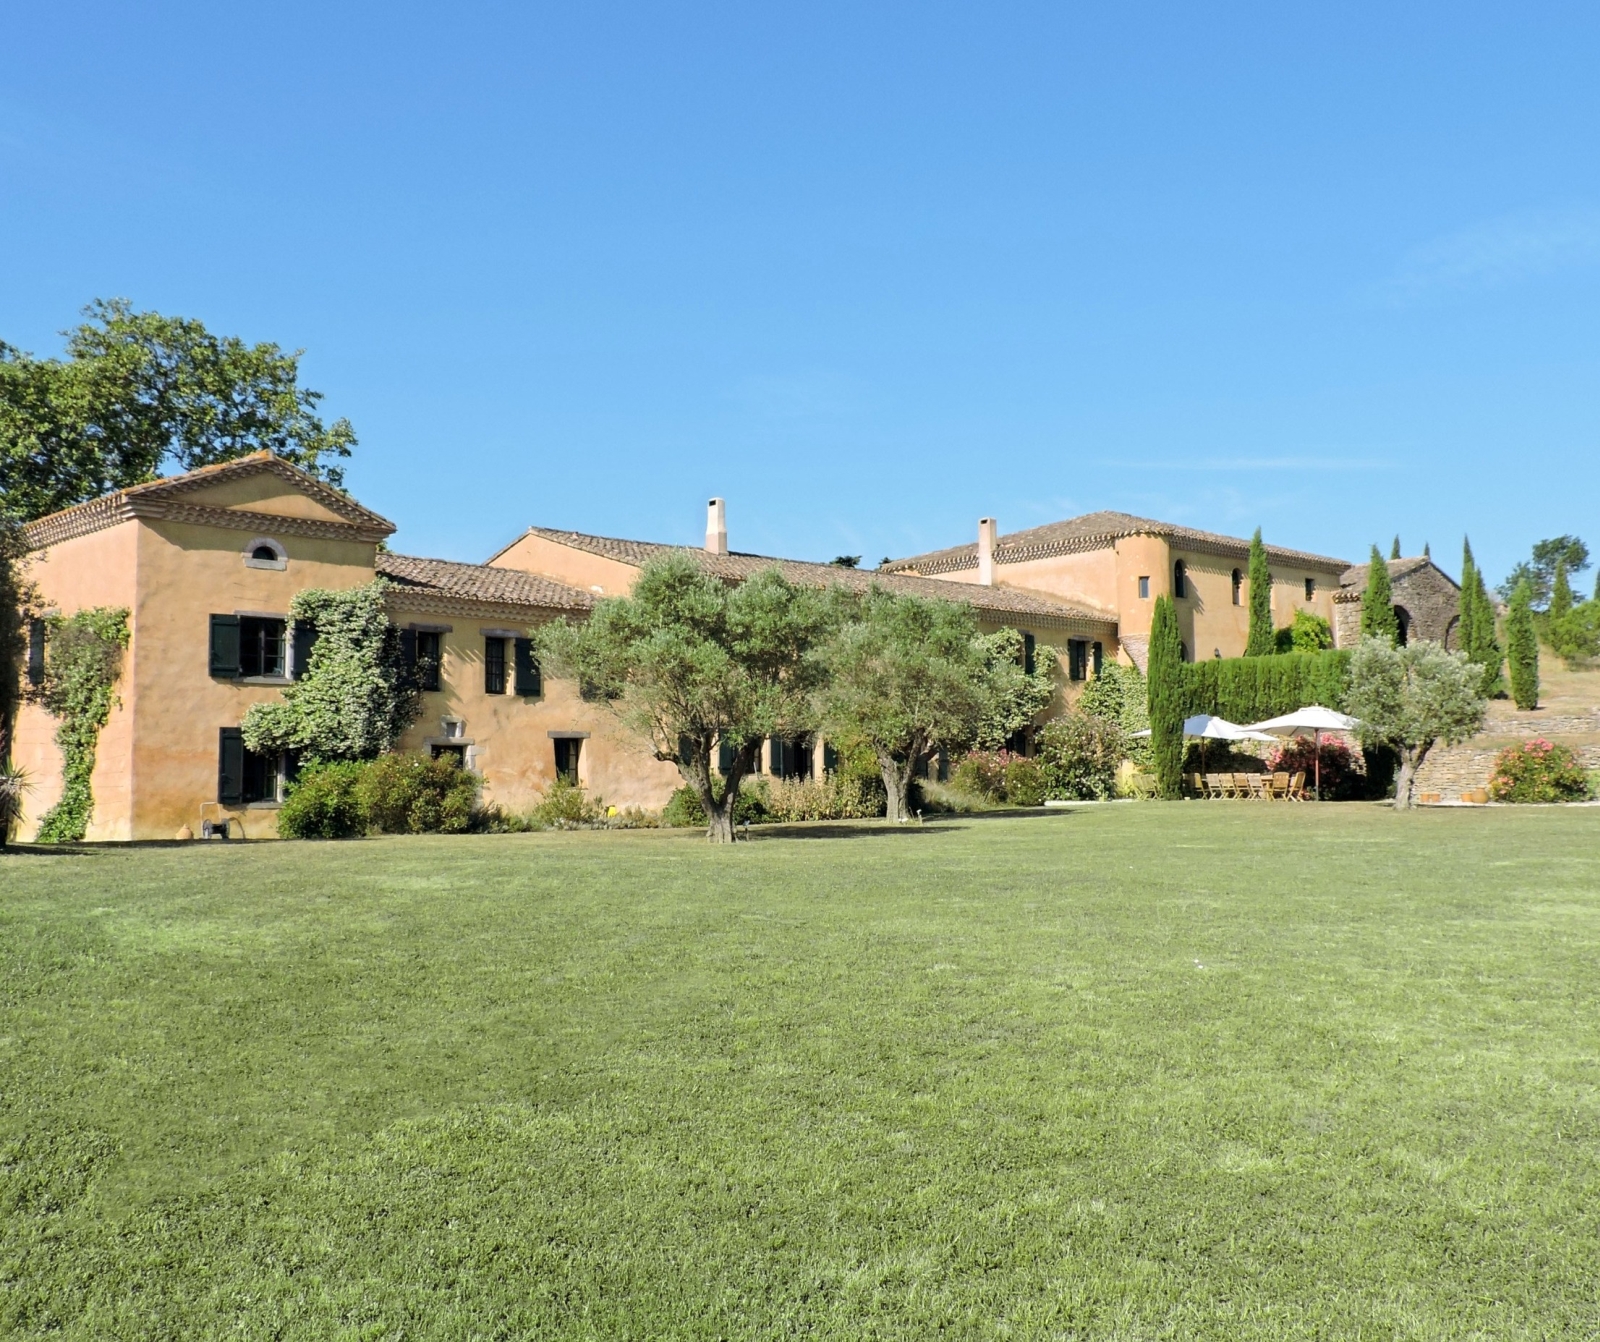 Back of villa and garden with green grass and trees at Domaine de Corbieres in South West France